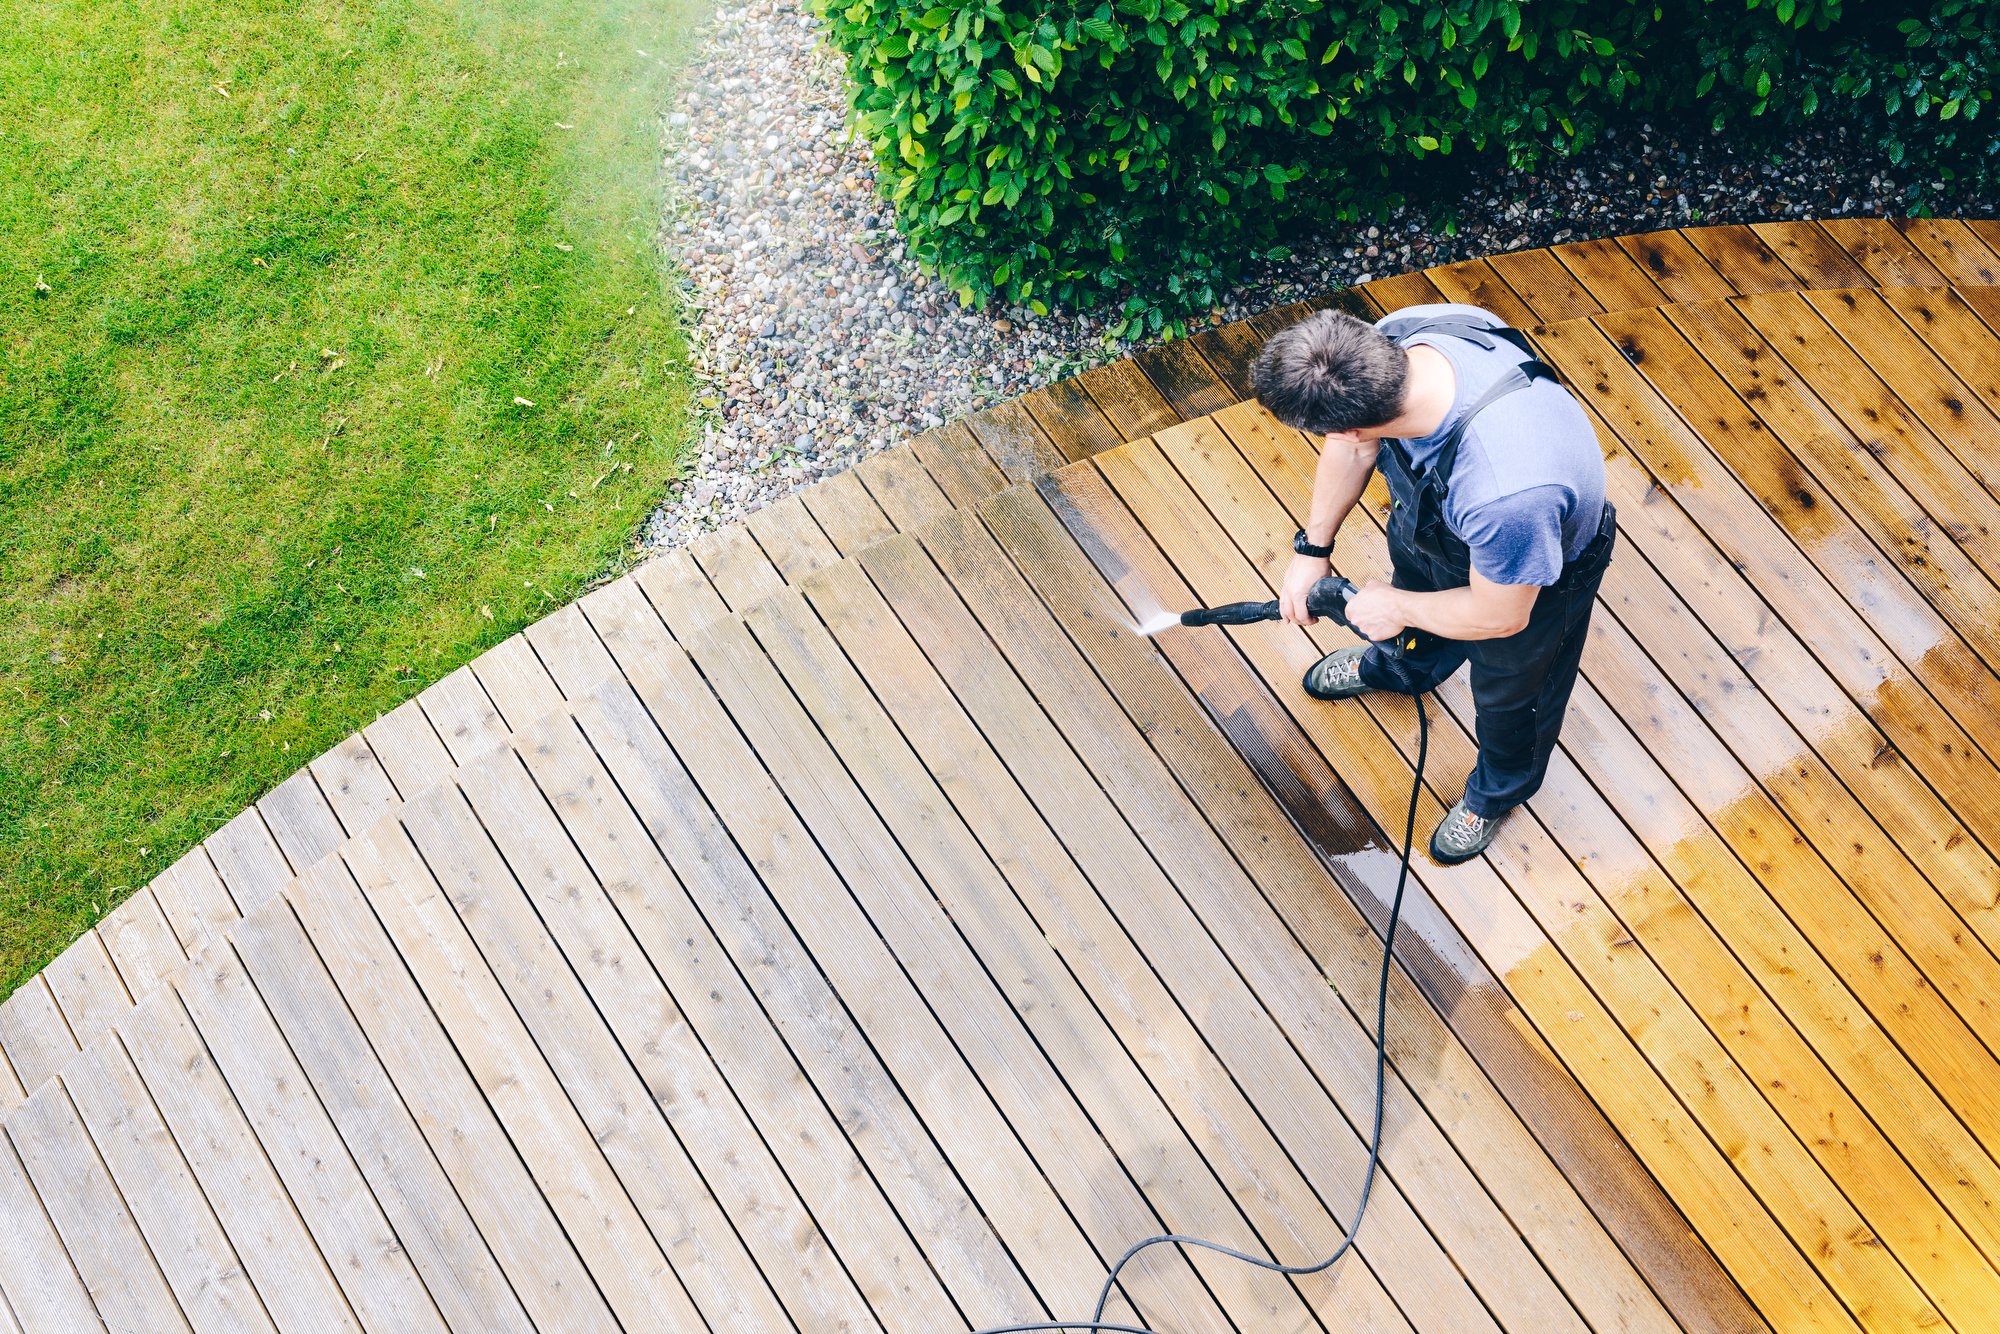 Home Maintenance Service Plans - What Are They, and How Do They Work?